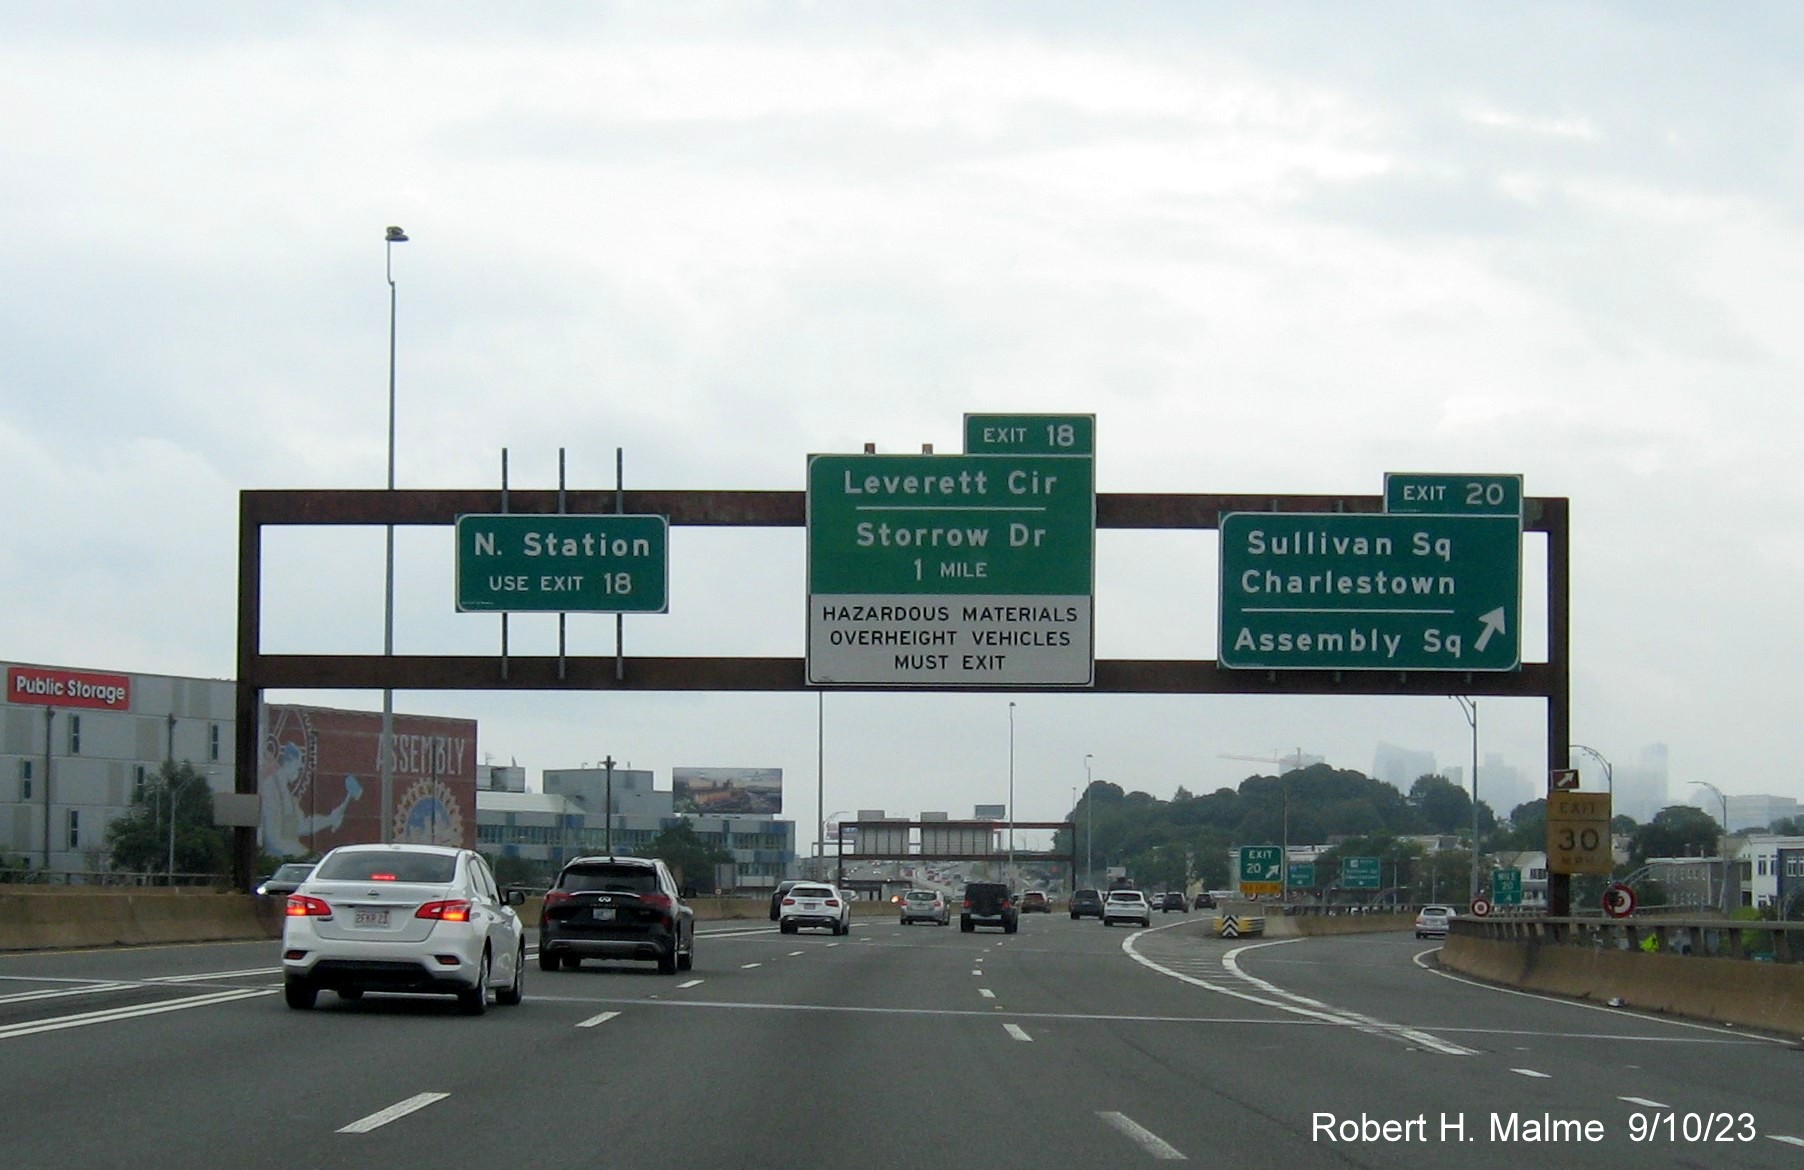 Image of overhead signs at ramp to Sullivan Square exit with new Storrow Drive 1 mile advance with MA 3 and MA 28 shields removed, September 2023